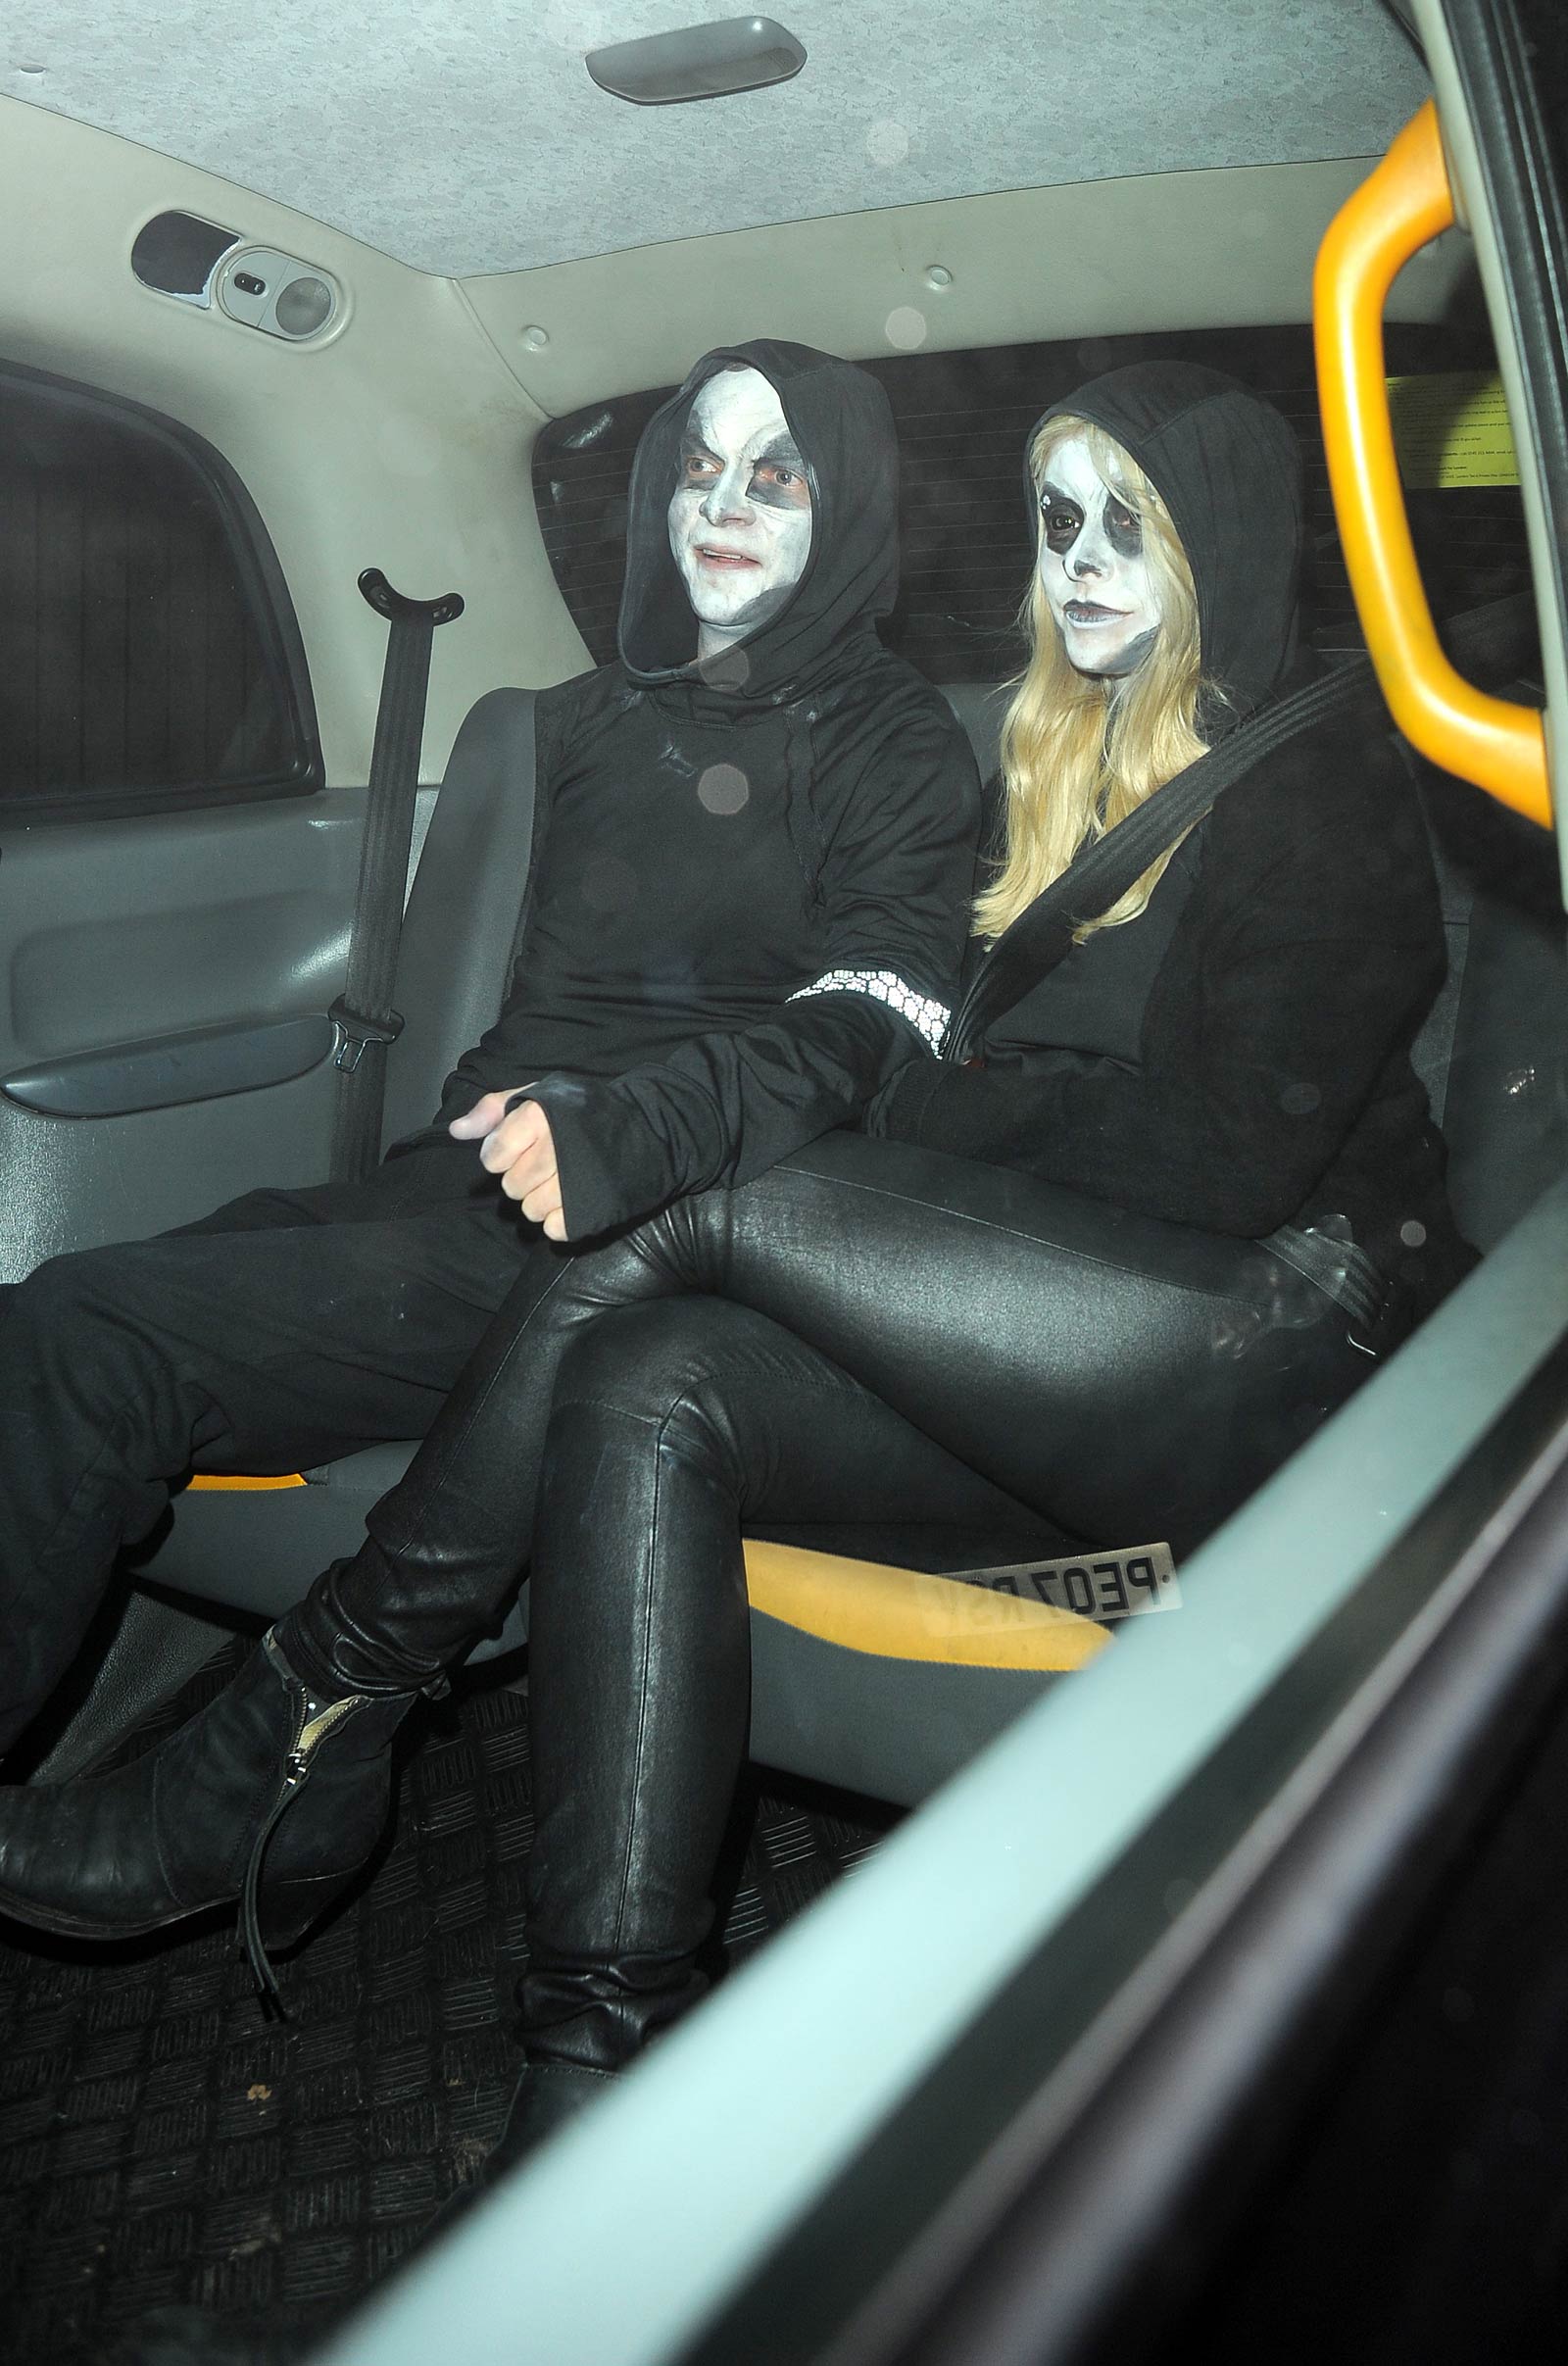 Holly Willoughby attends Jonathan Ross annual Halloween party